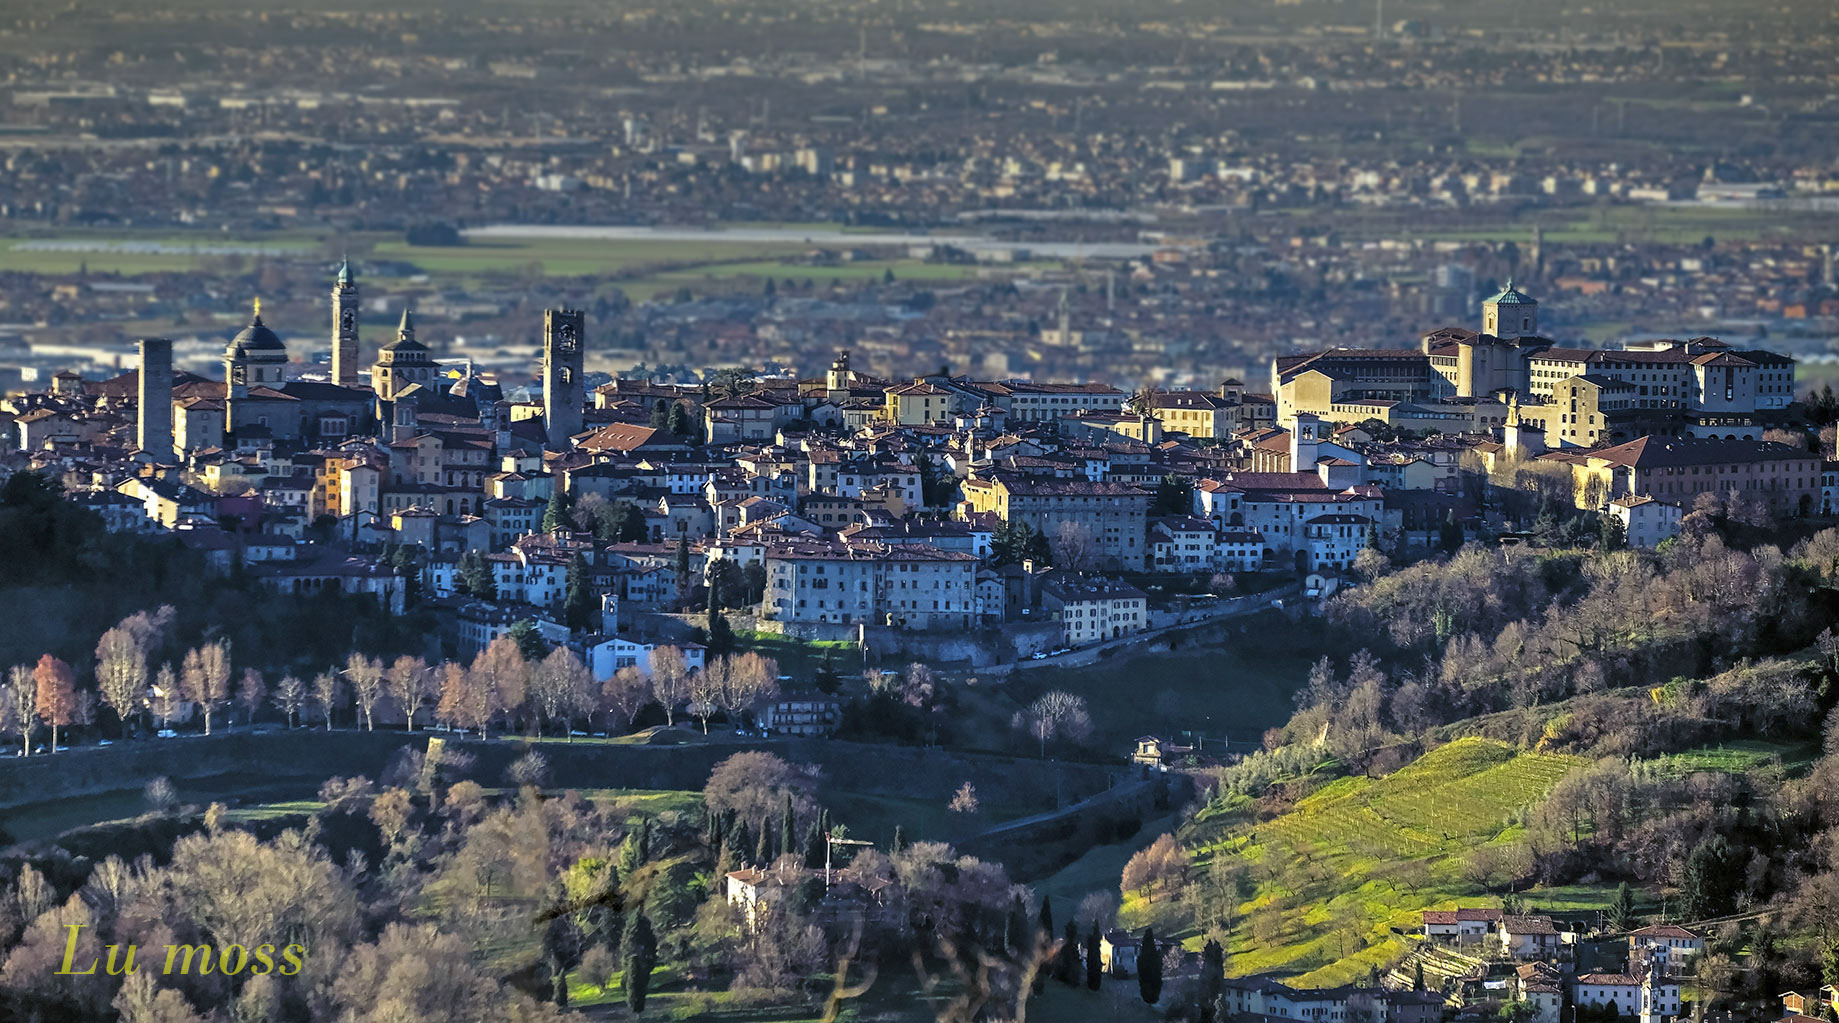 The other side of Bergamo....